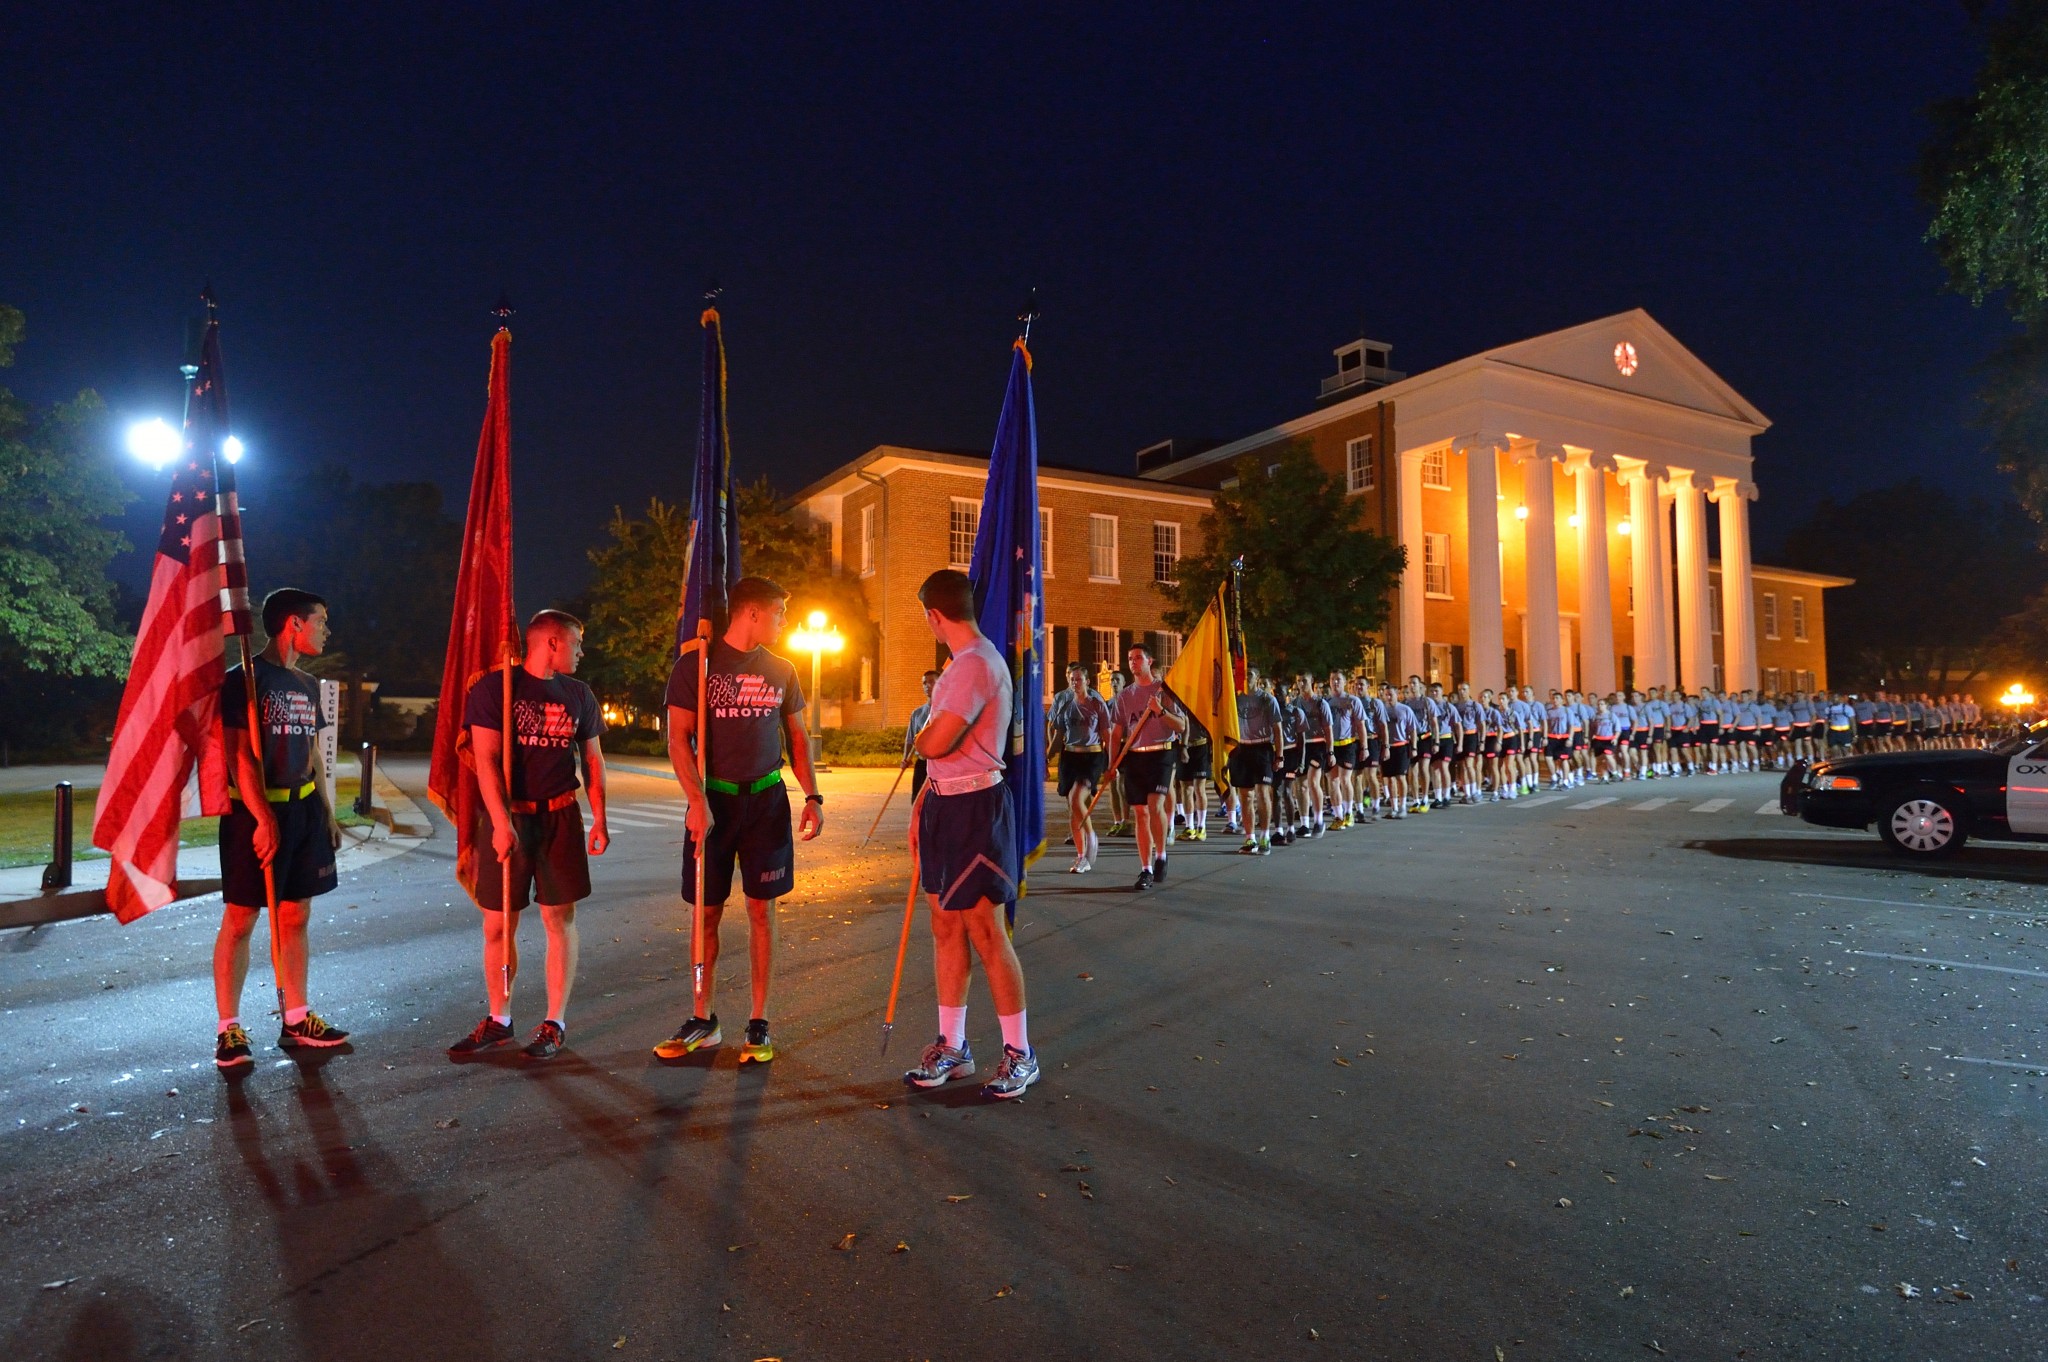 UM ROTC Cadets gear up for the 9/11 Memorial run last year. Photo by Robert Jordan/Ole Miss Communications